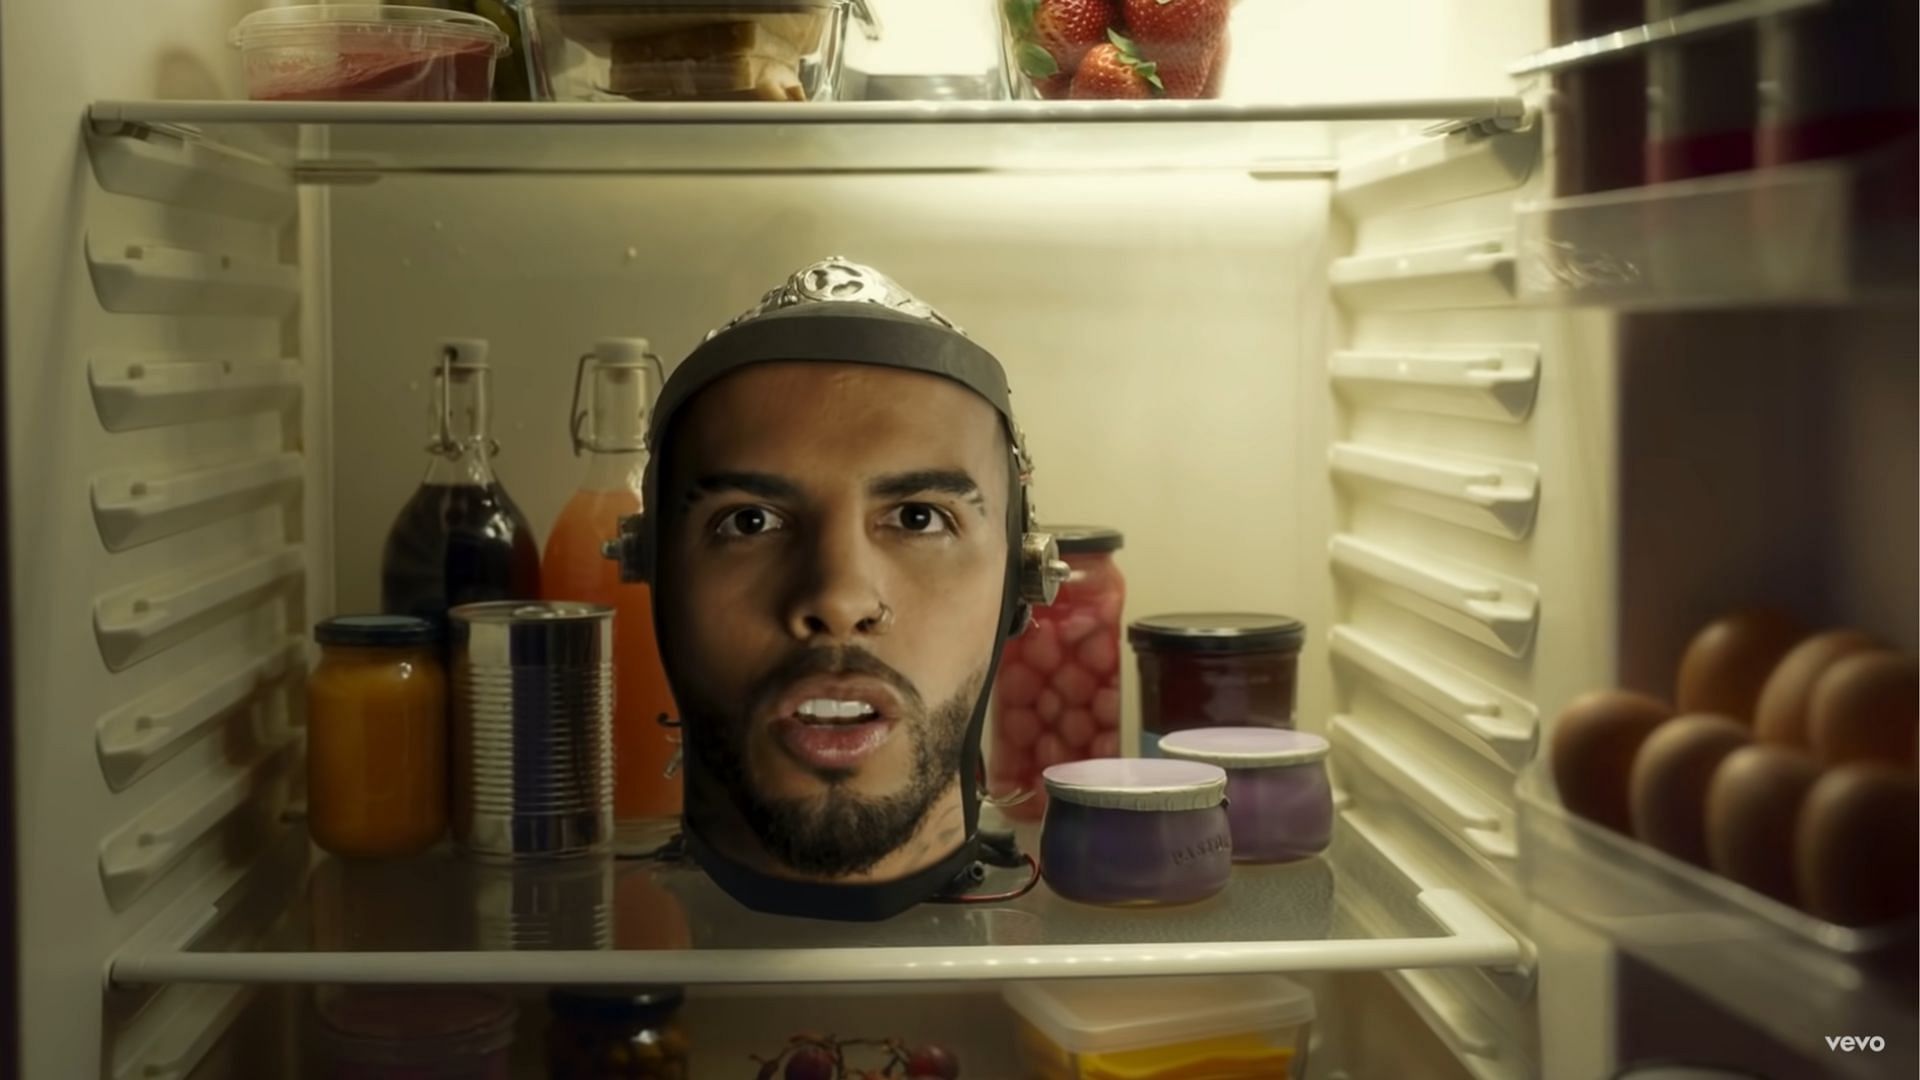 Te Felicito&#039;s music video shows Shakira opening the fridge to find her collaborator&#039;s head surrounded by strawberry products (Image via YouTube).